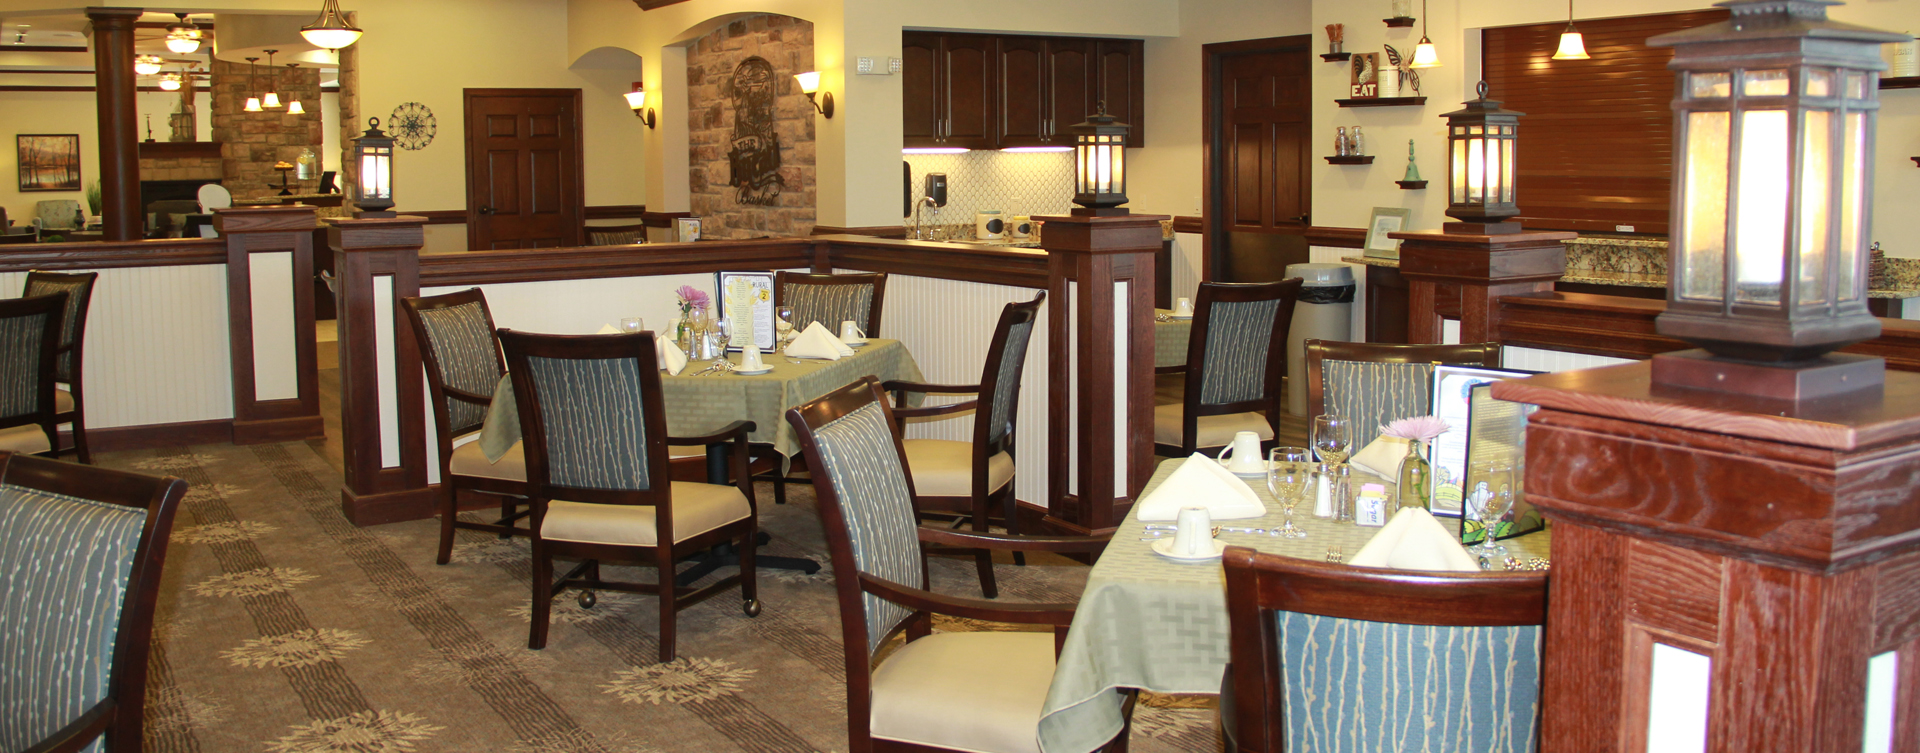 Enjoy homestyle food with made-from-scratch recipes in our dining room at Bickford of Chesterfield